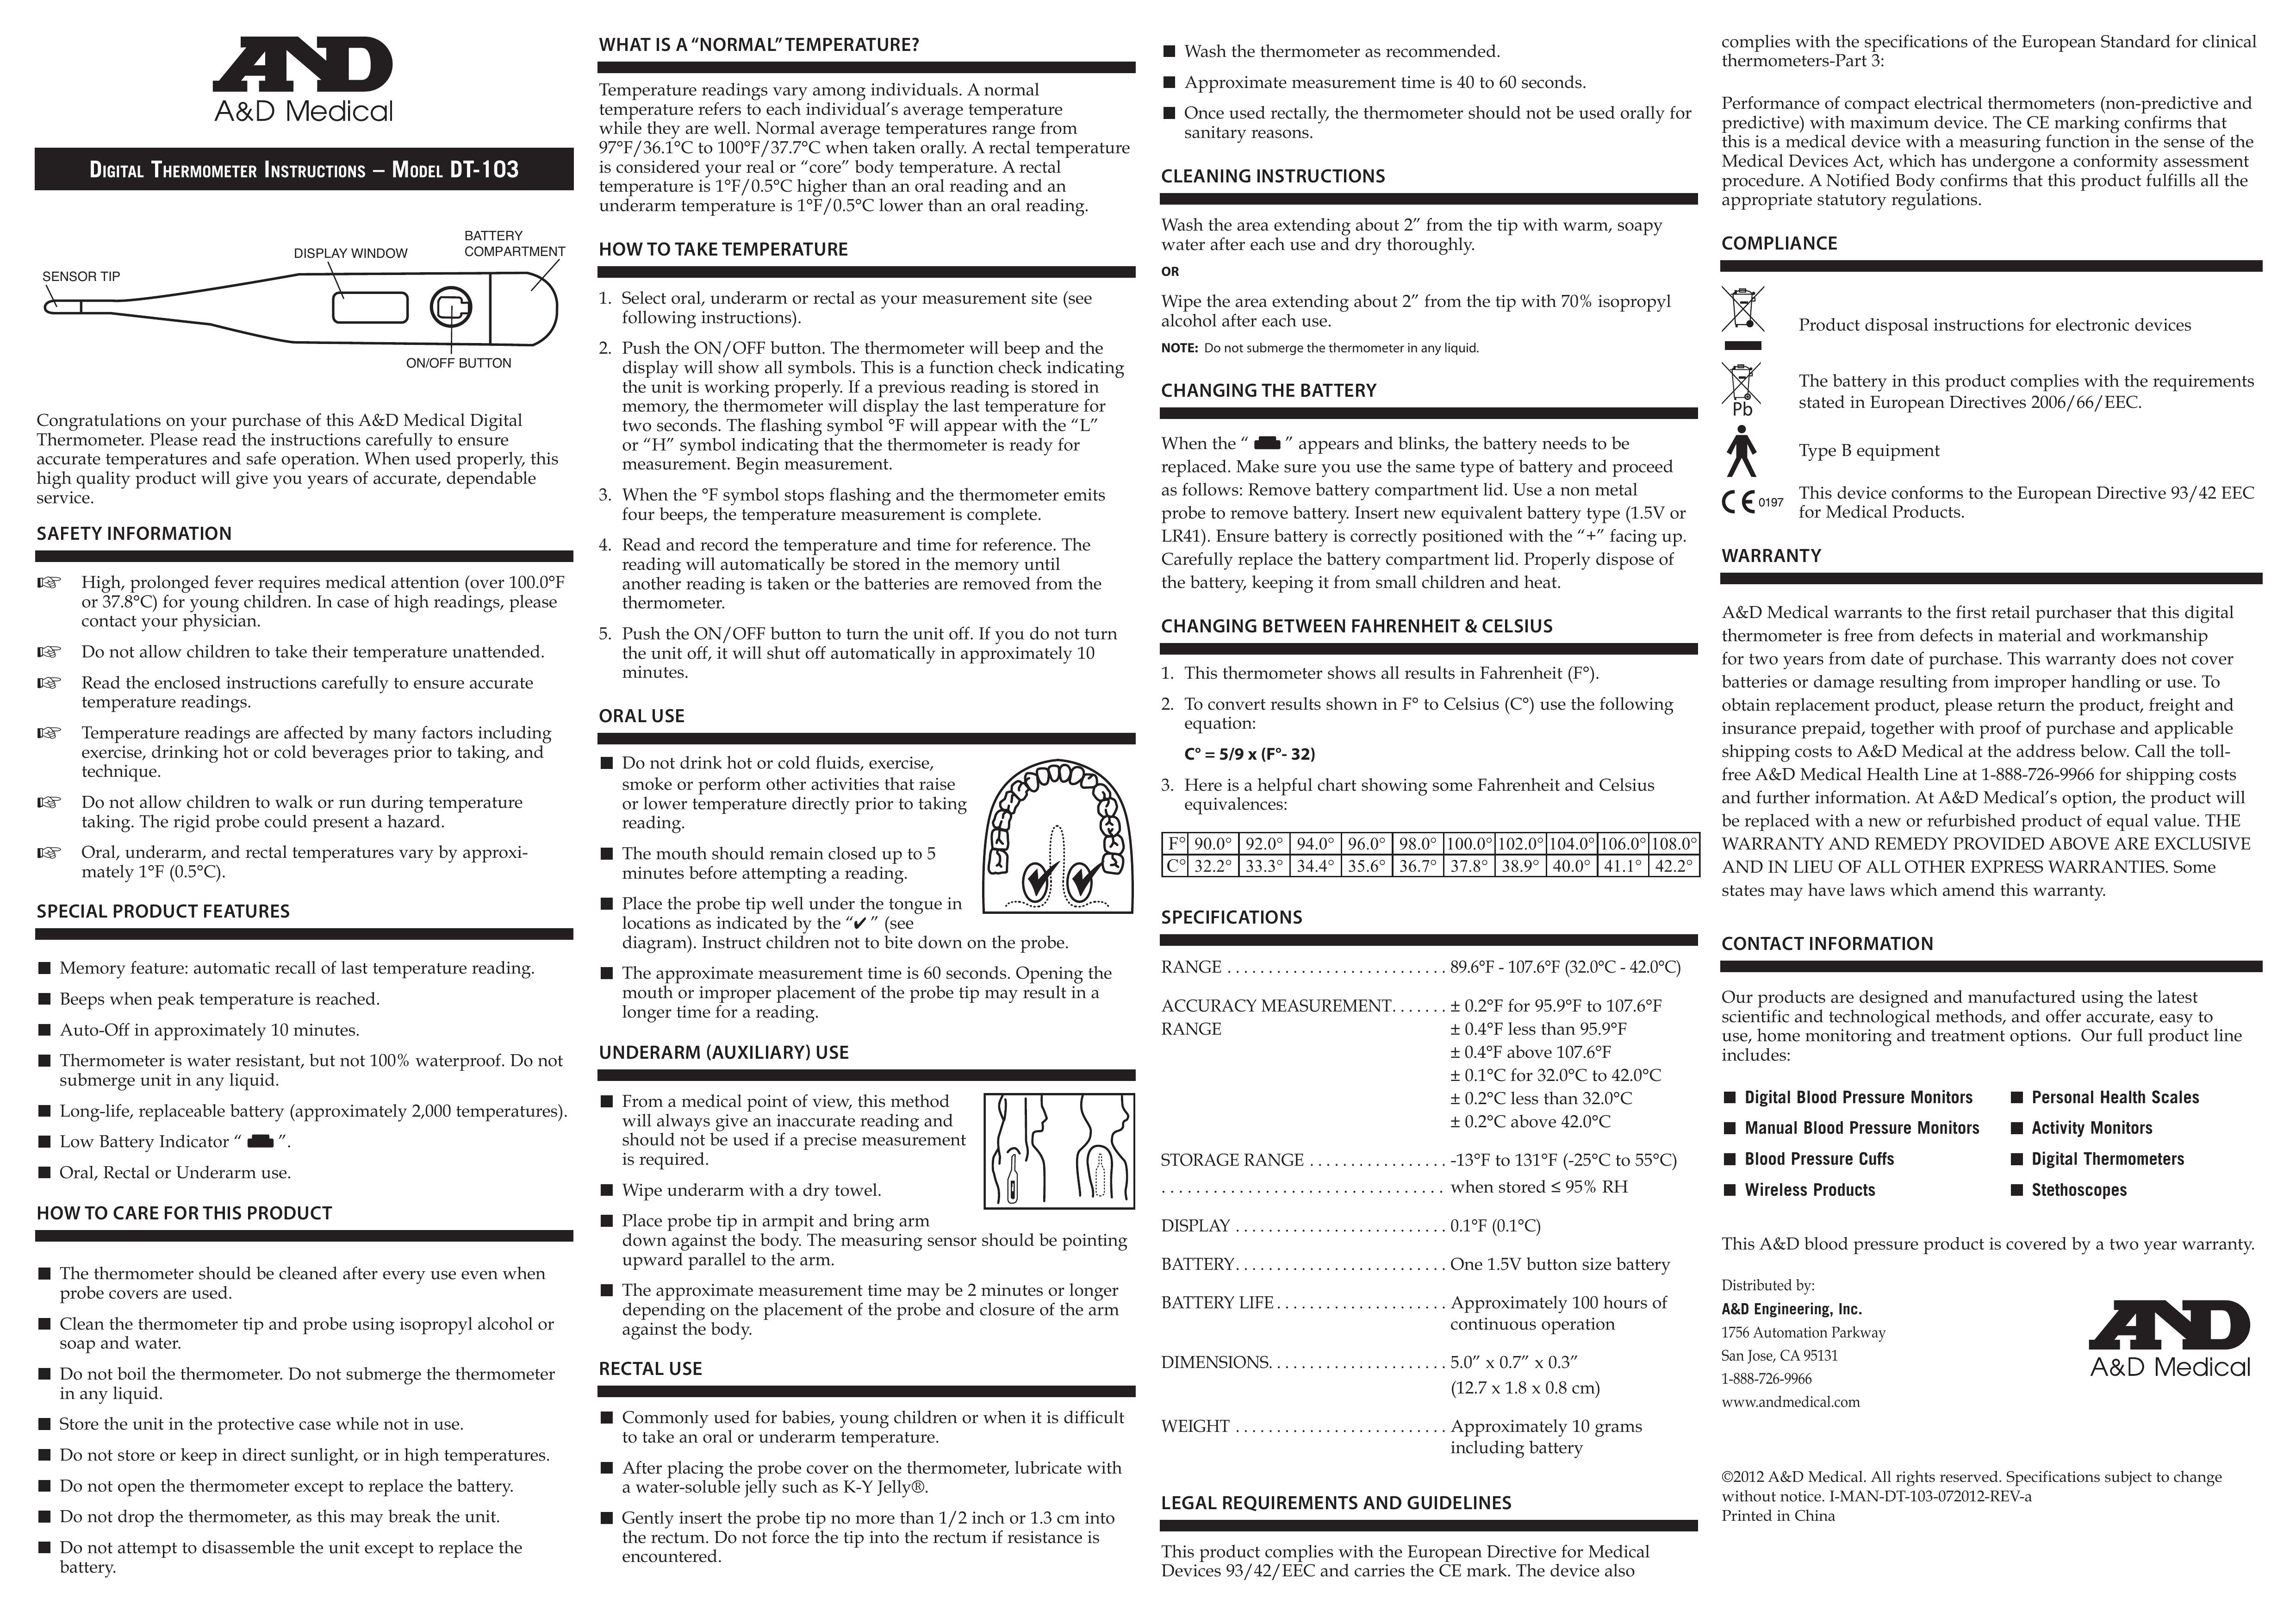 A&D DT-103 Thermometer User Manual